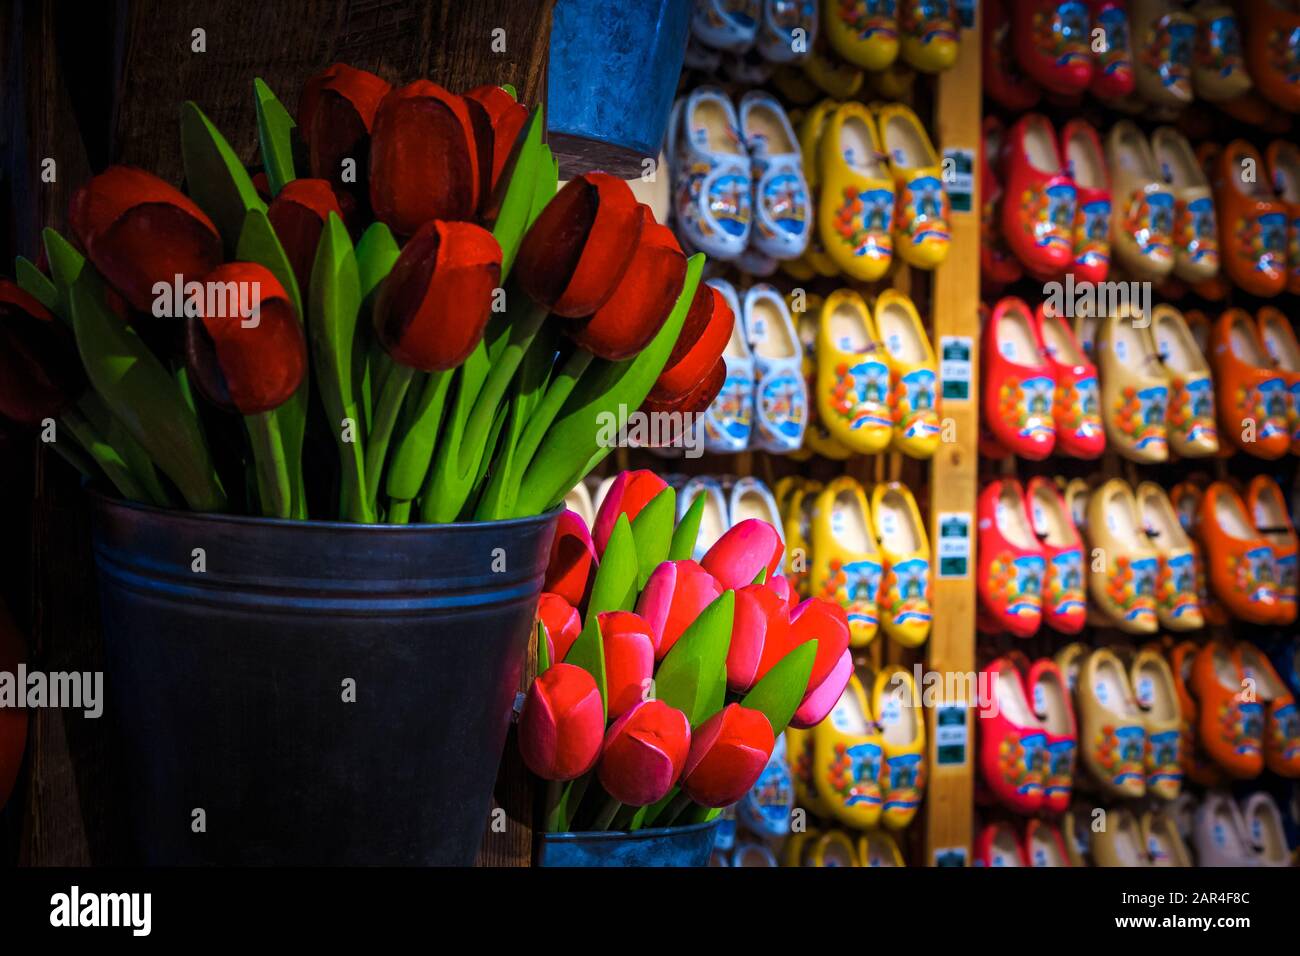 Stunning colorful bouquets of wooden tulips in the bucket and wooden shoes in row on the wall. Dutch souvenir shop decoration with handmade gift objec Stock Photo